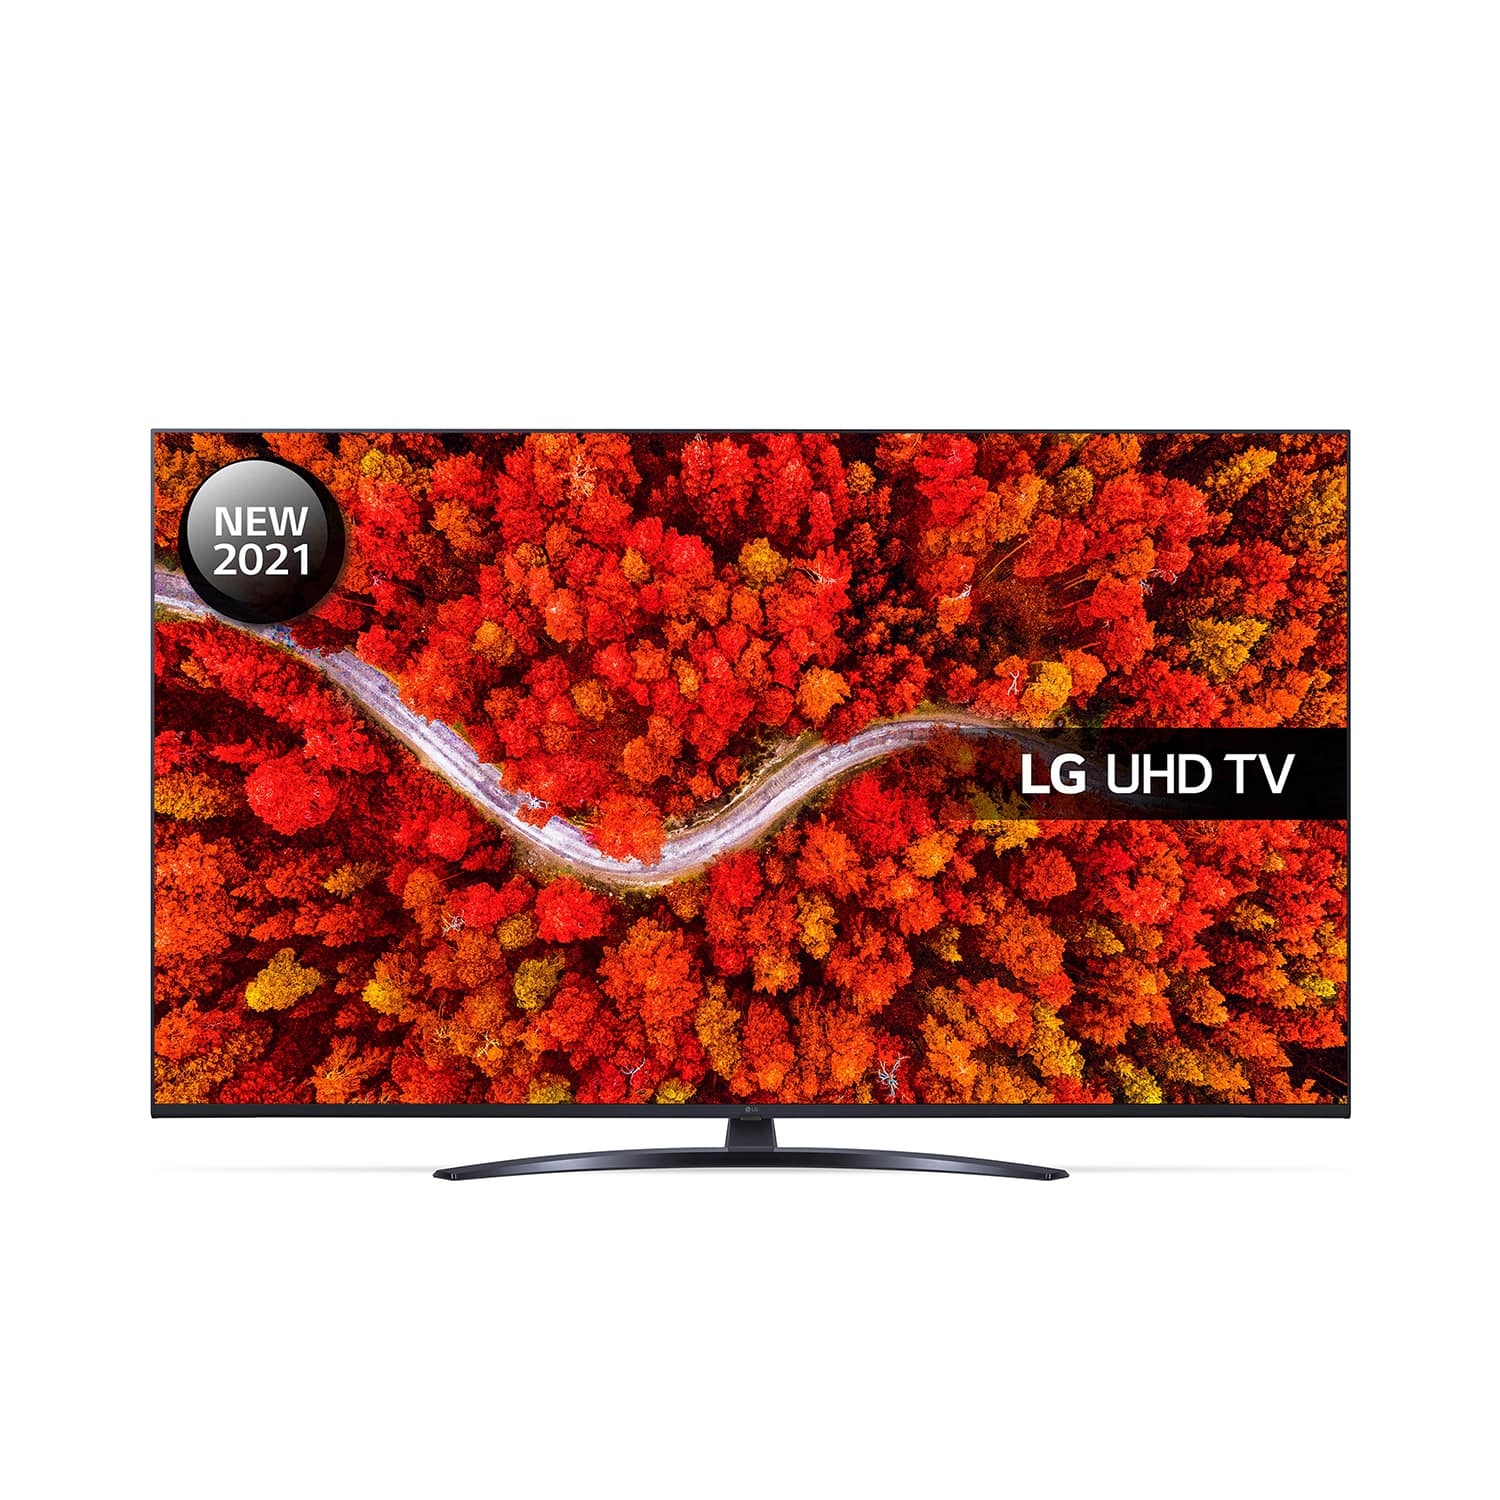 LG 50UP81006LA 50" 4K Ultra HD LED Smart TV with Freeview Play Freesat HD & Voice Assistants - 0